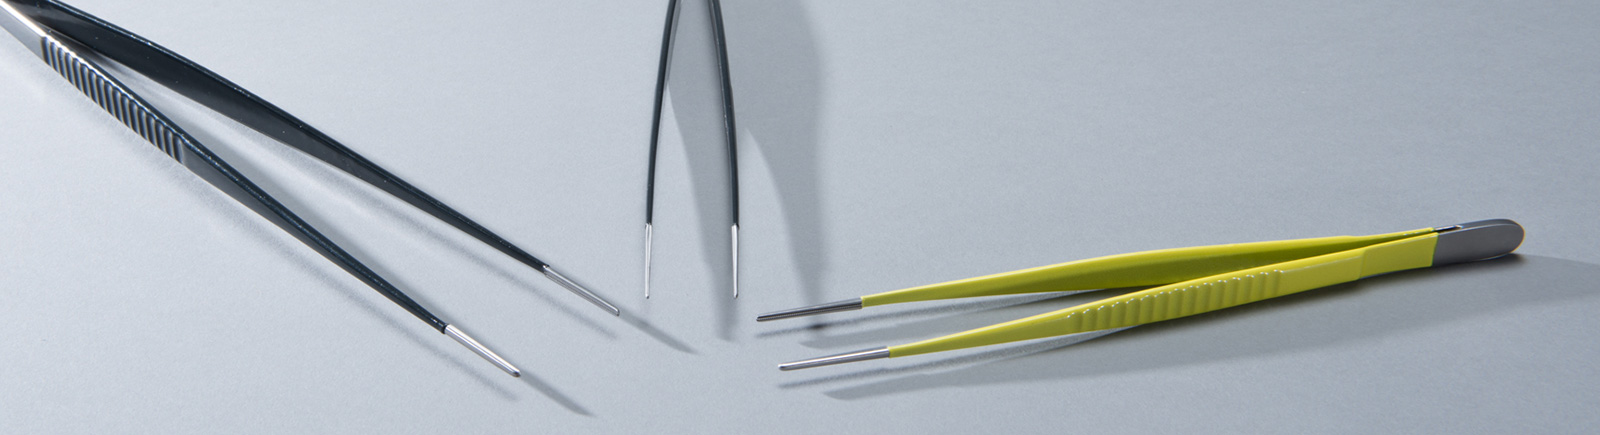 Electrically insulating coating on tweezers for the medical industrie